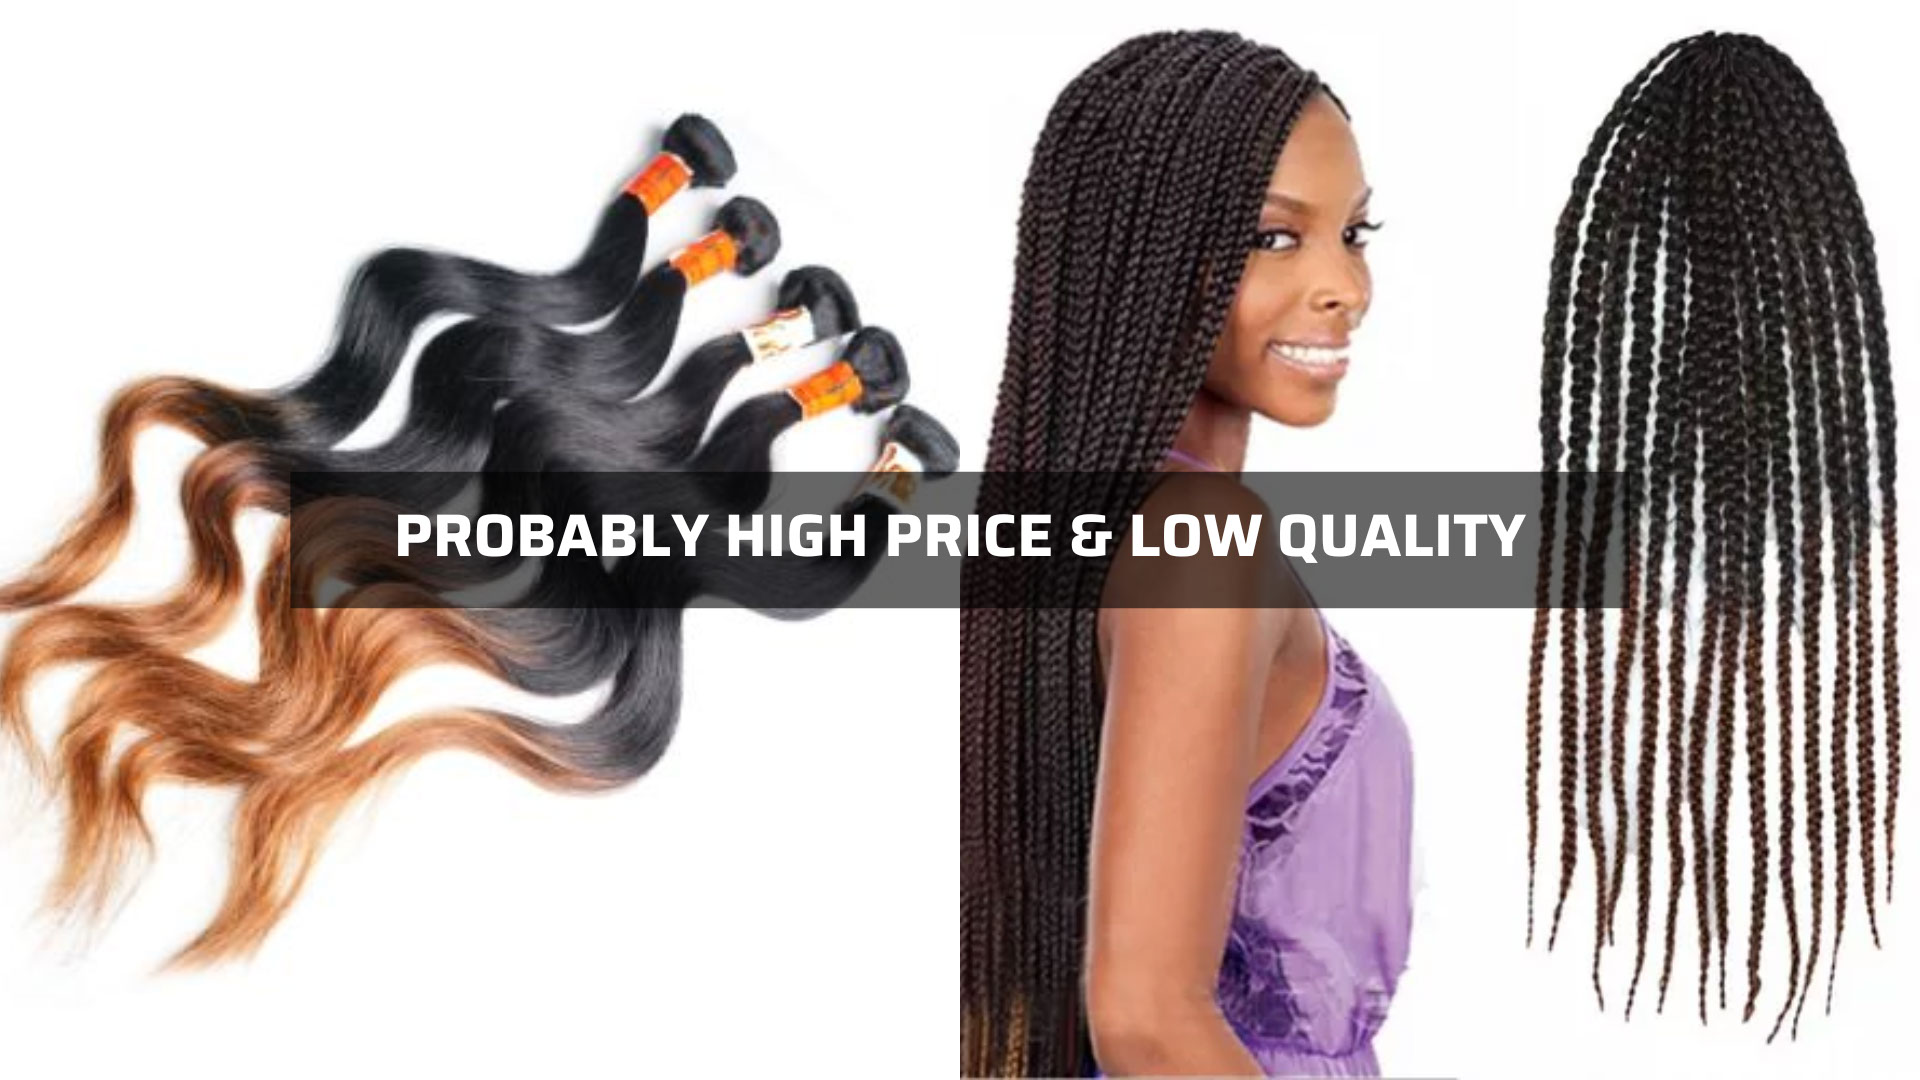 Buying hair from vendors in Nigeria has both pros and cons